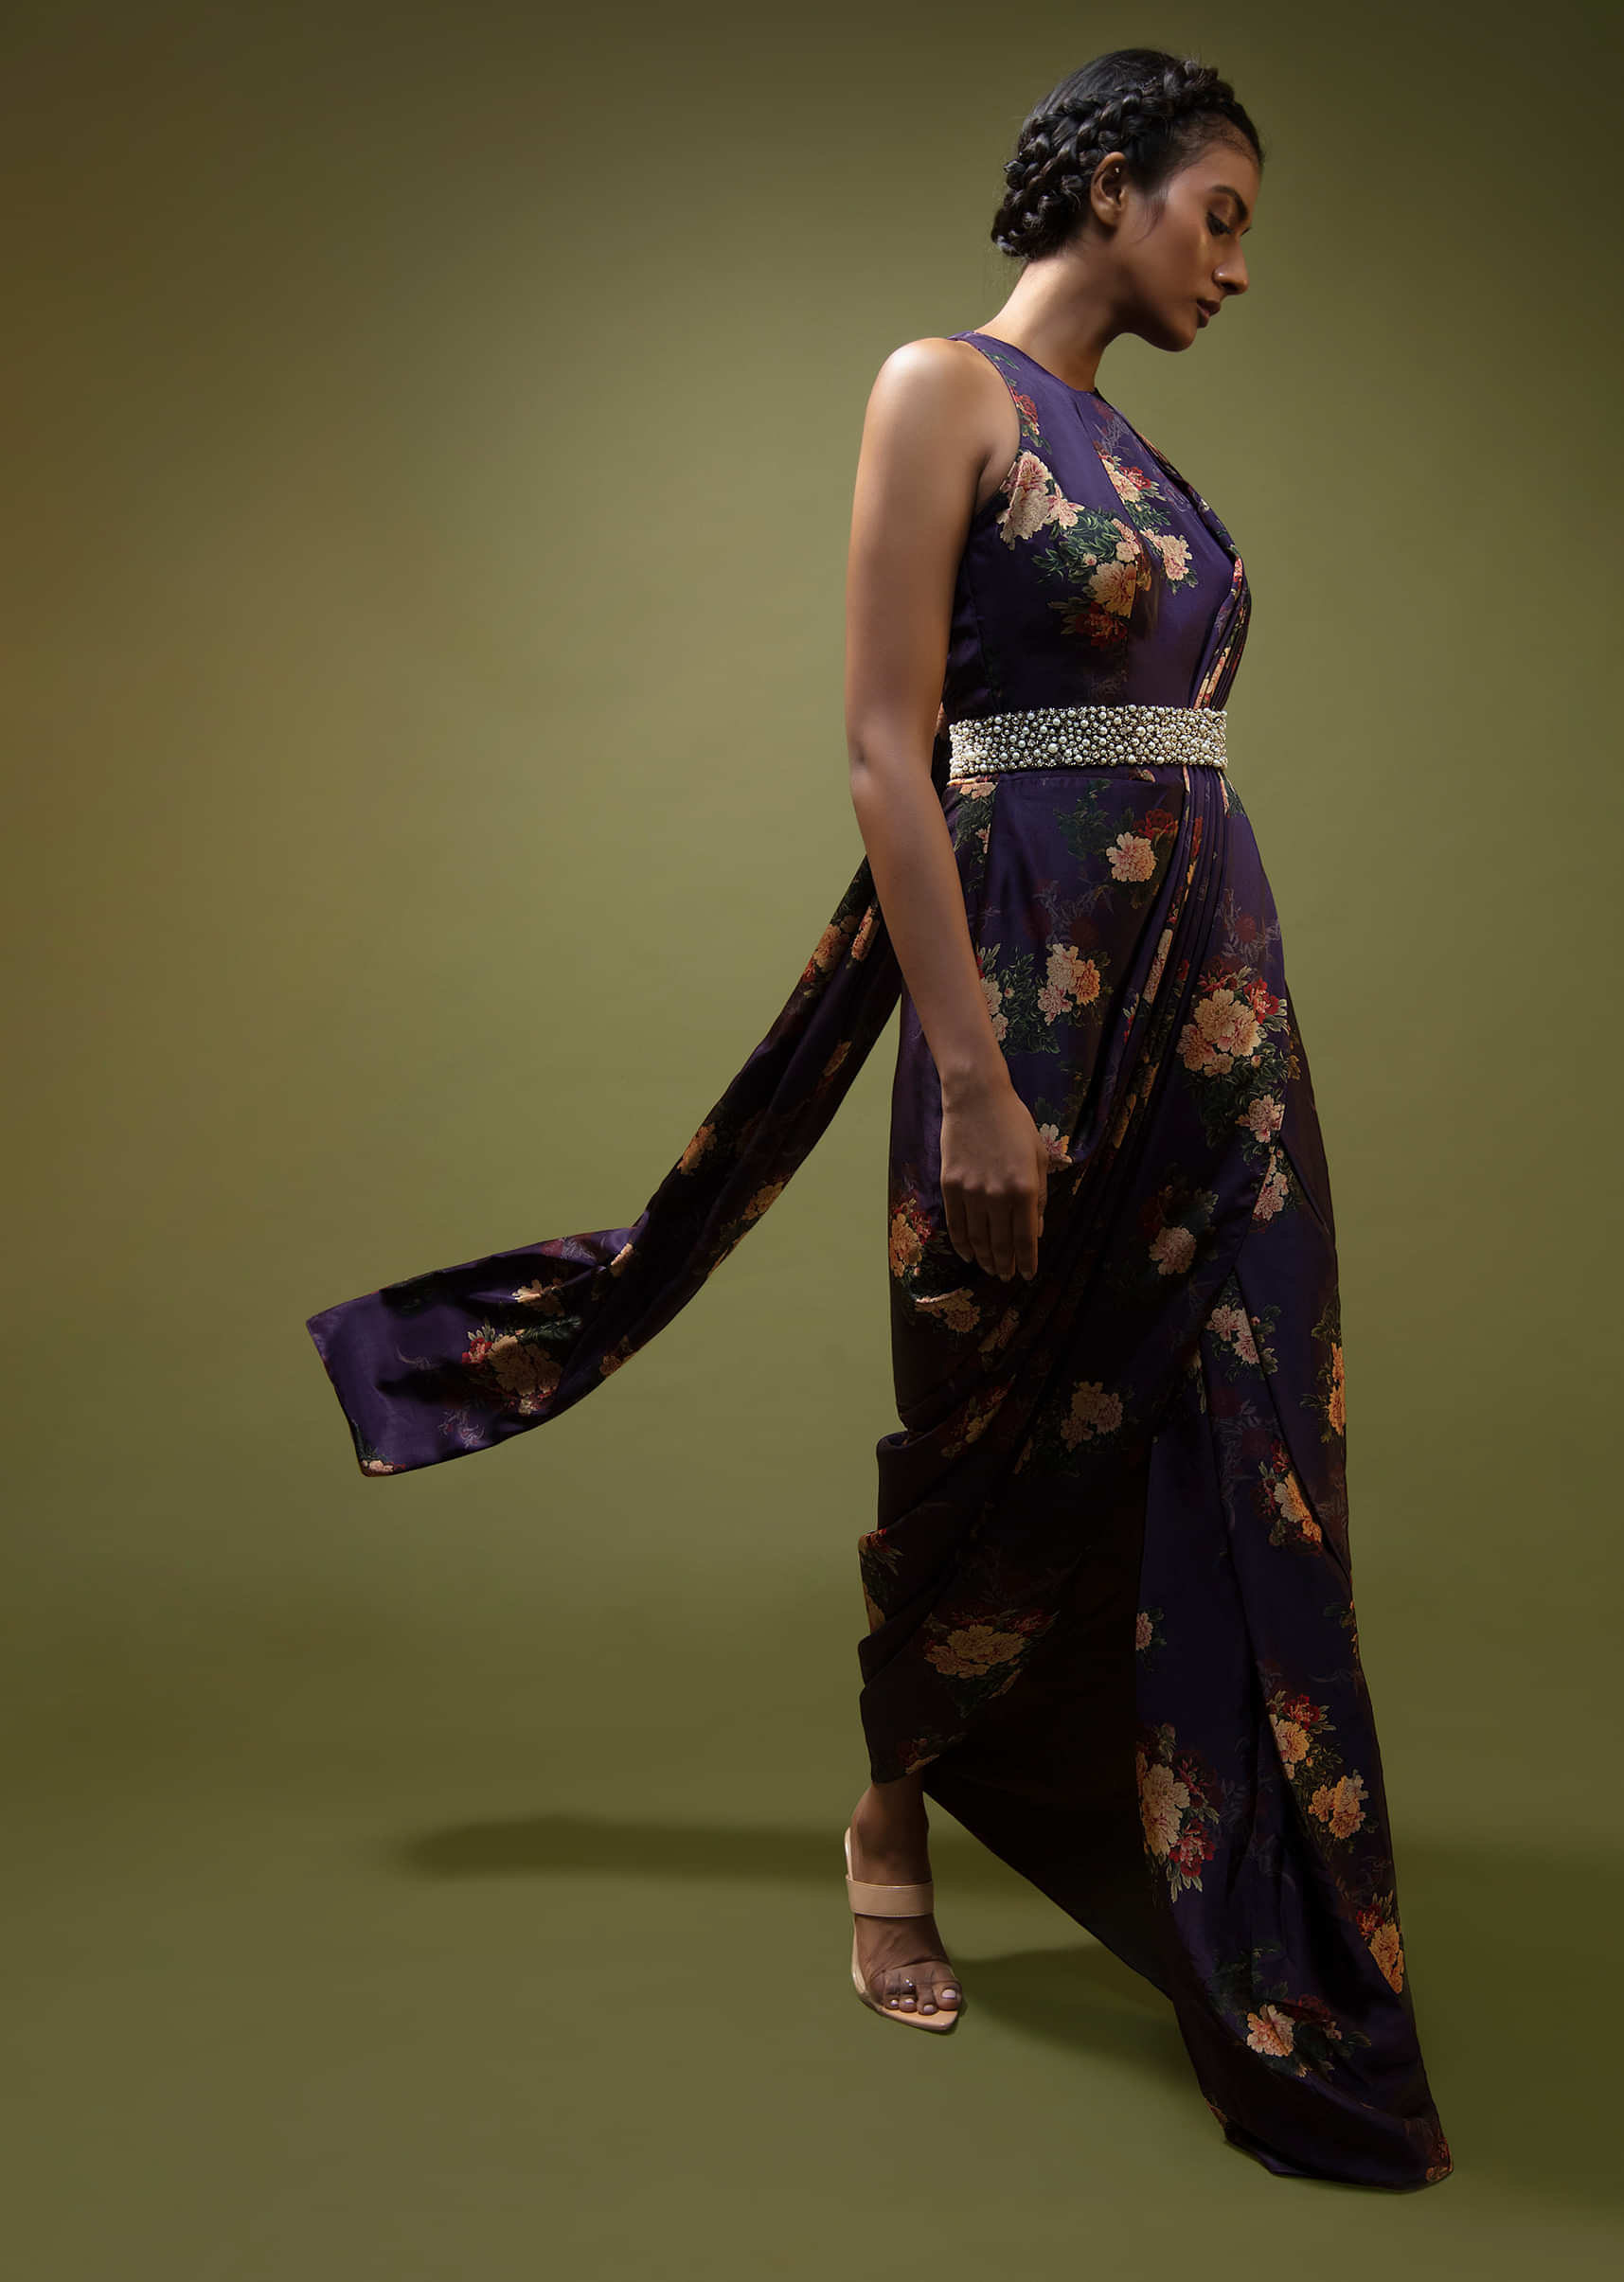 Jewel Purple Saree Gown In Floral Printed Satin With A Cowl Draped Pallu And Moti Embroidered Belt